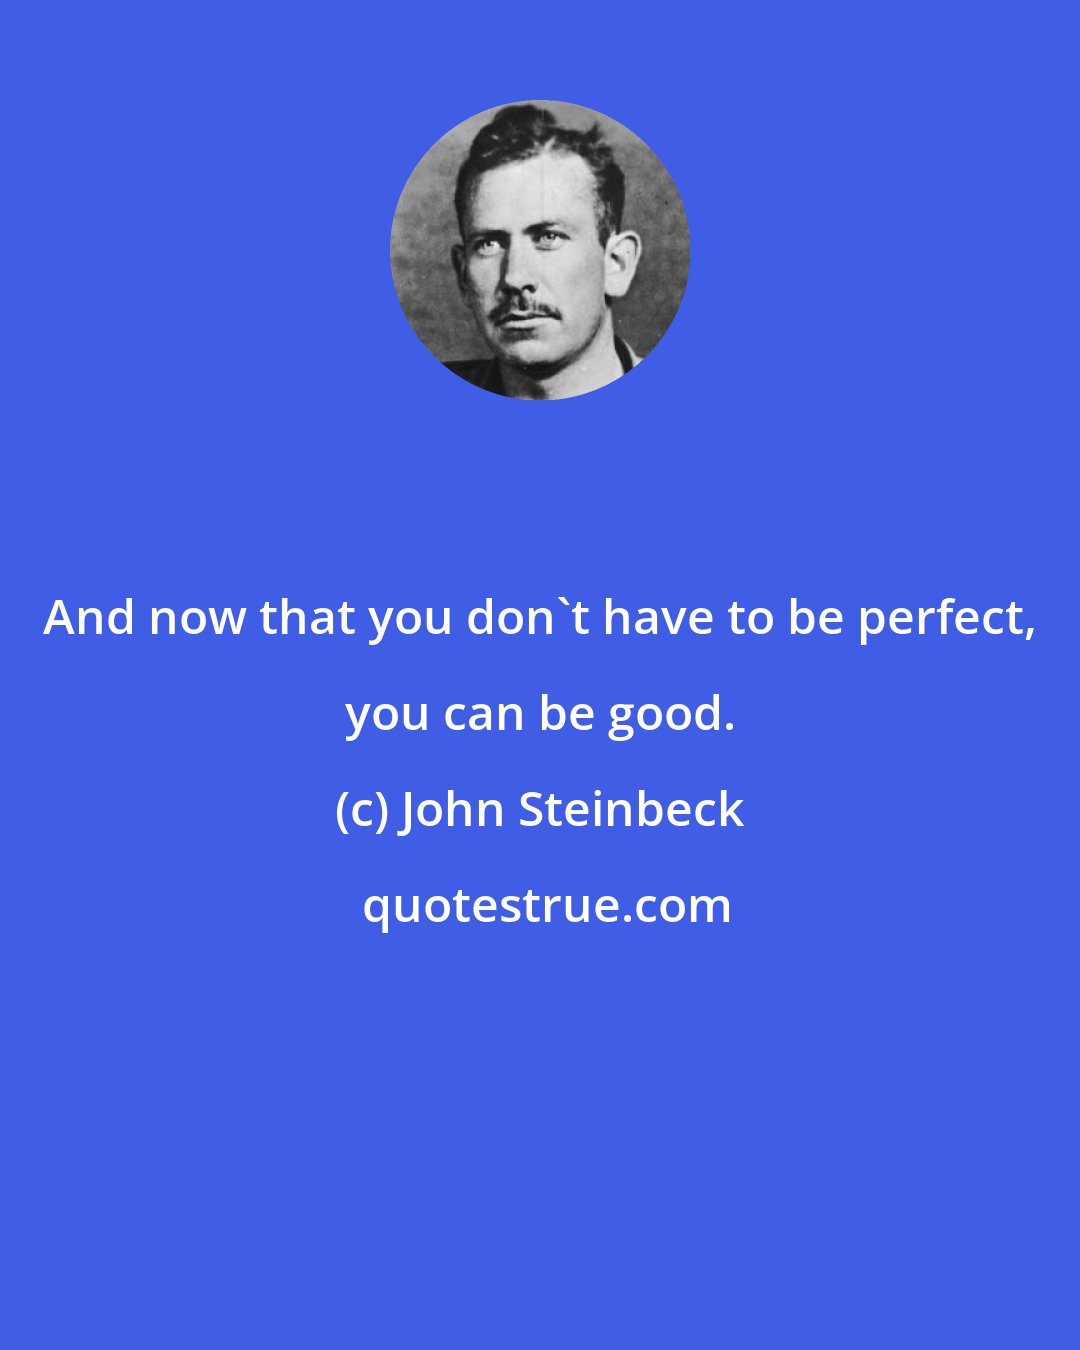 John Steinbeck: And now that you don't have to be perfect, you can be good.